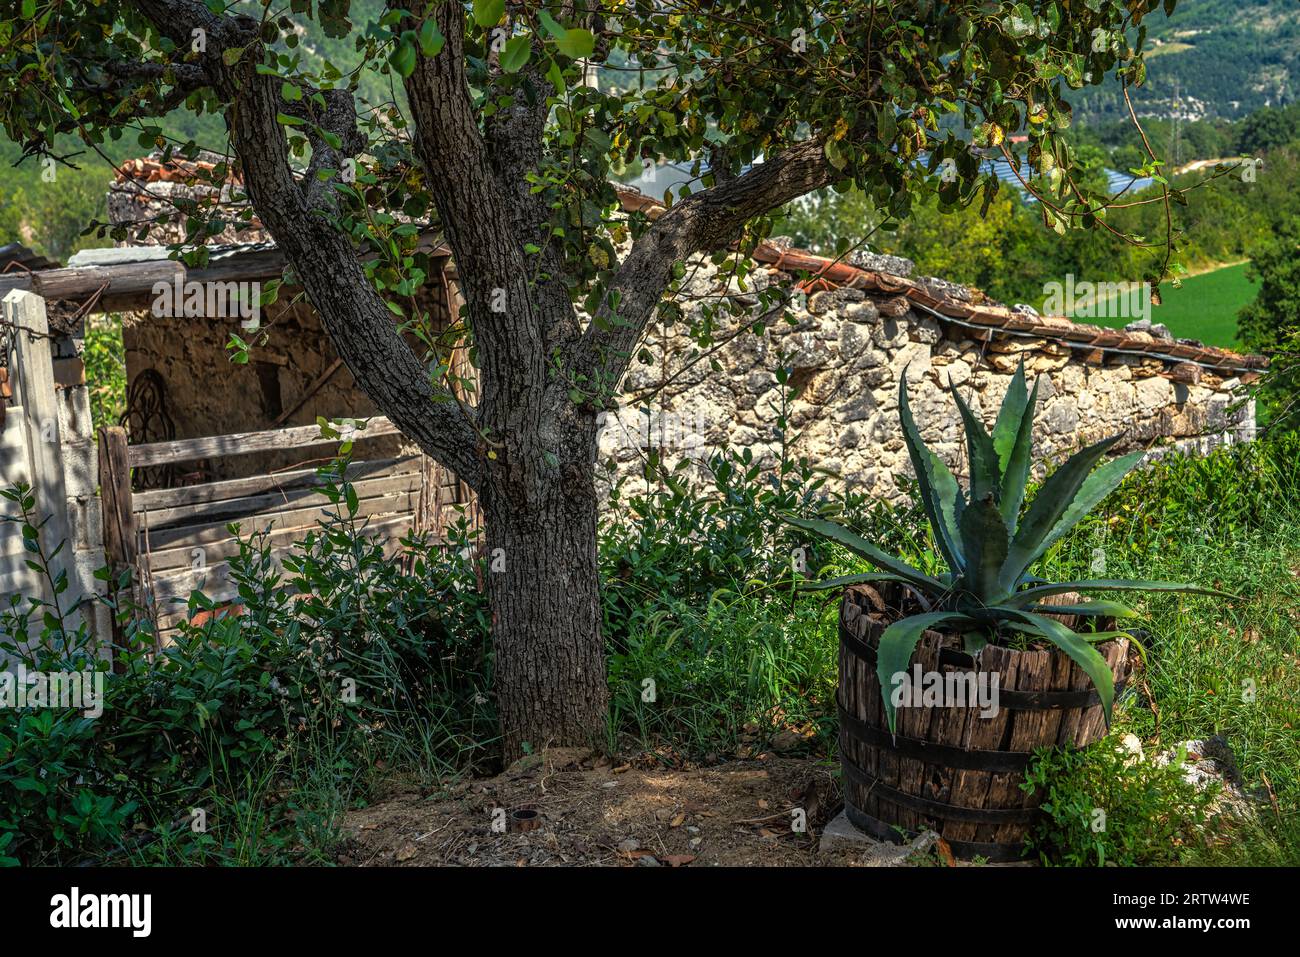 In a small garden an apple plant and an Agave in a wooden pot. Marche region, Italy, Europe Stock Photo